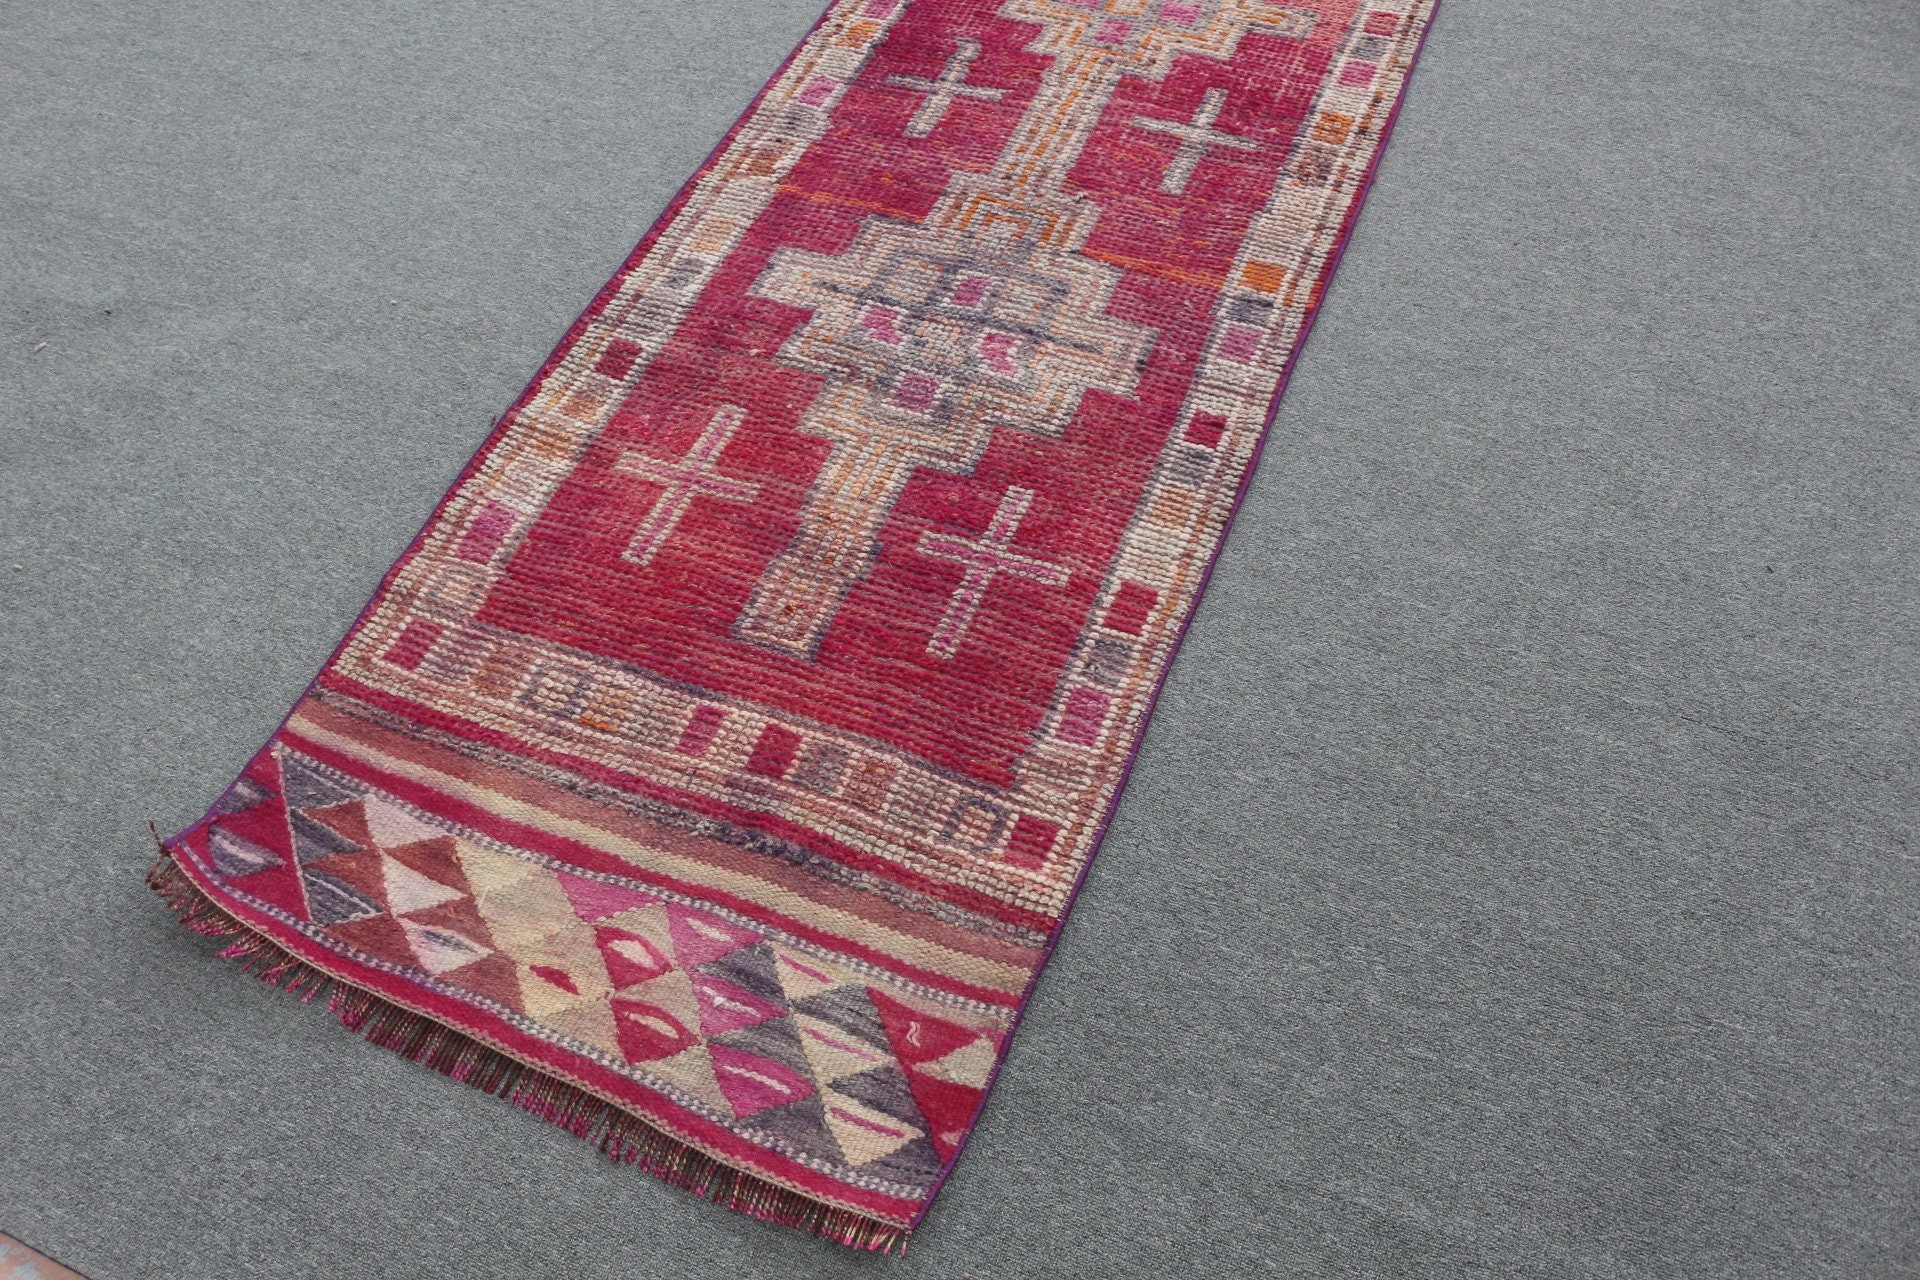 Cool Rug, Rugs for Kitchen, Cute Rug, 2.6x10 ft Runner Rugs, Turkish Rugs, Vintage Rugs, Purple Home Decor Rugs, Kitchen Rug